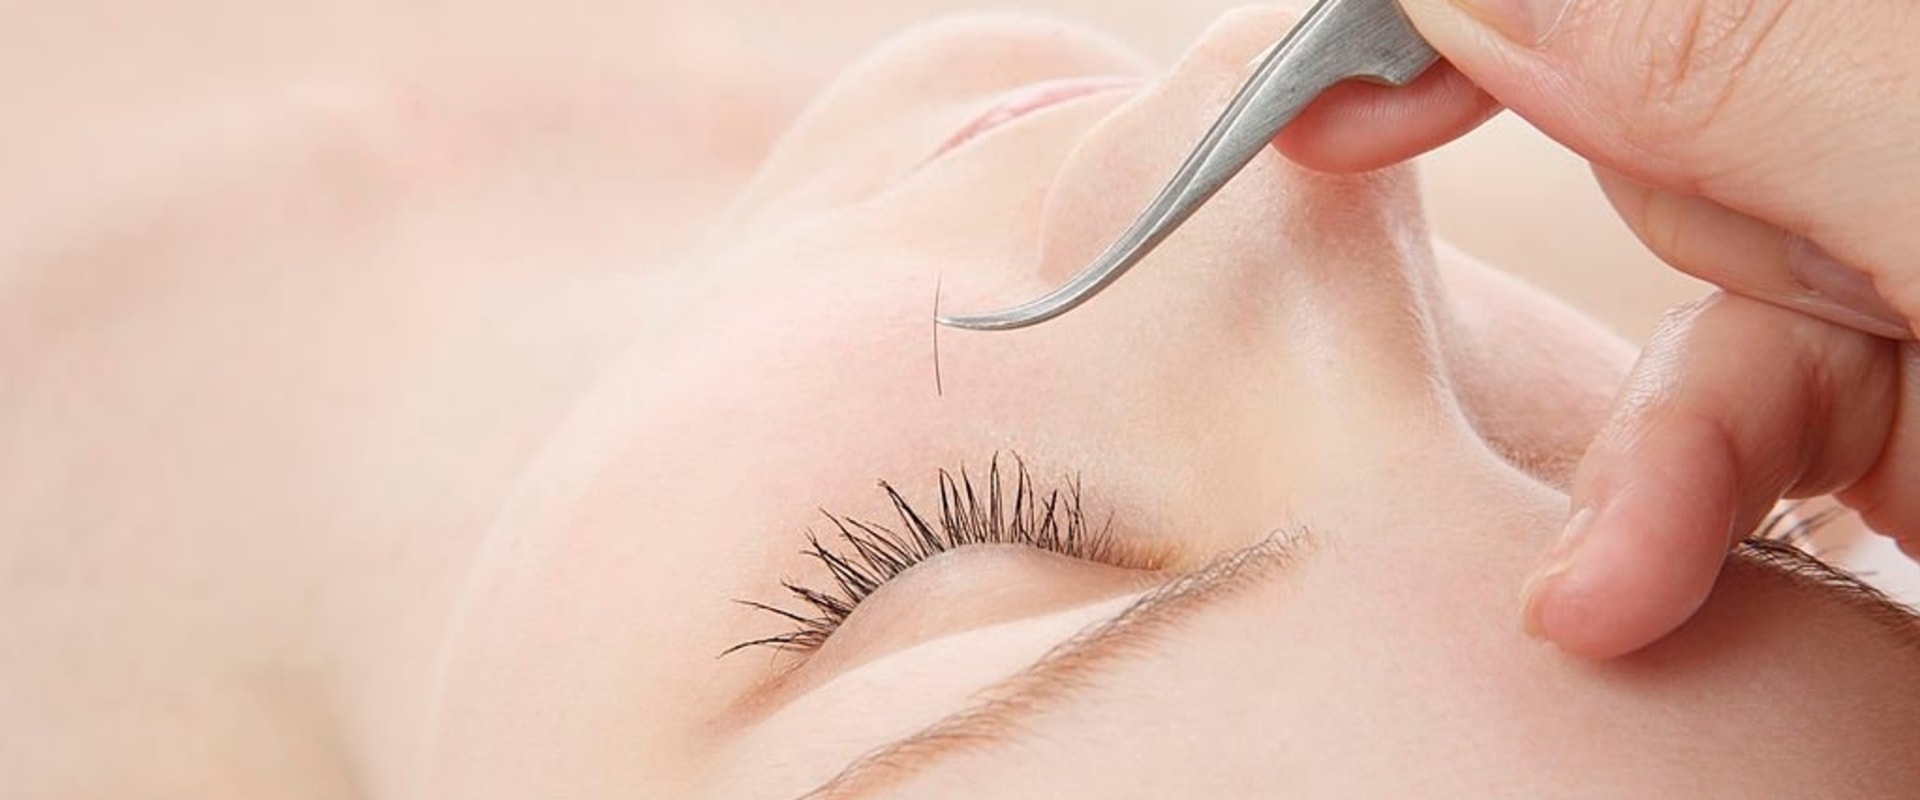 How long should lash extensions last before falling out?